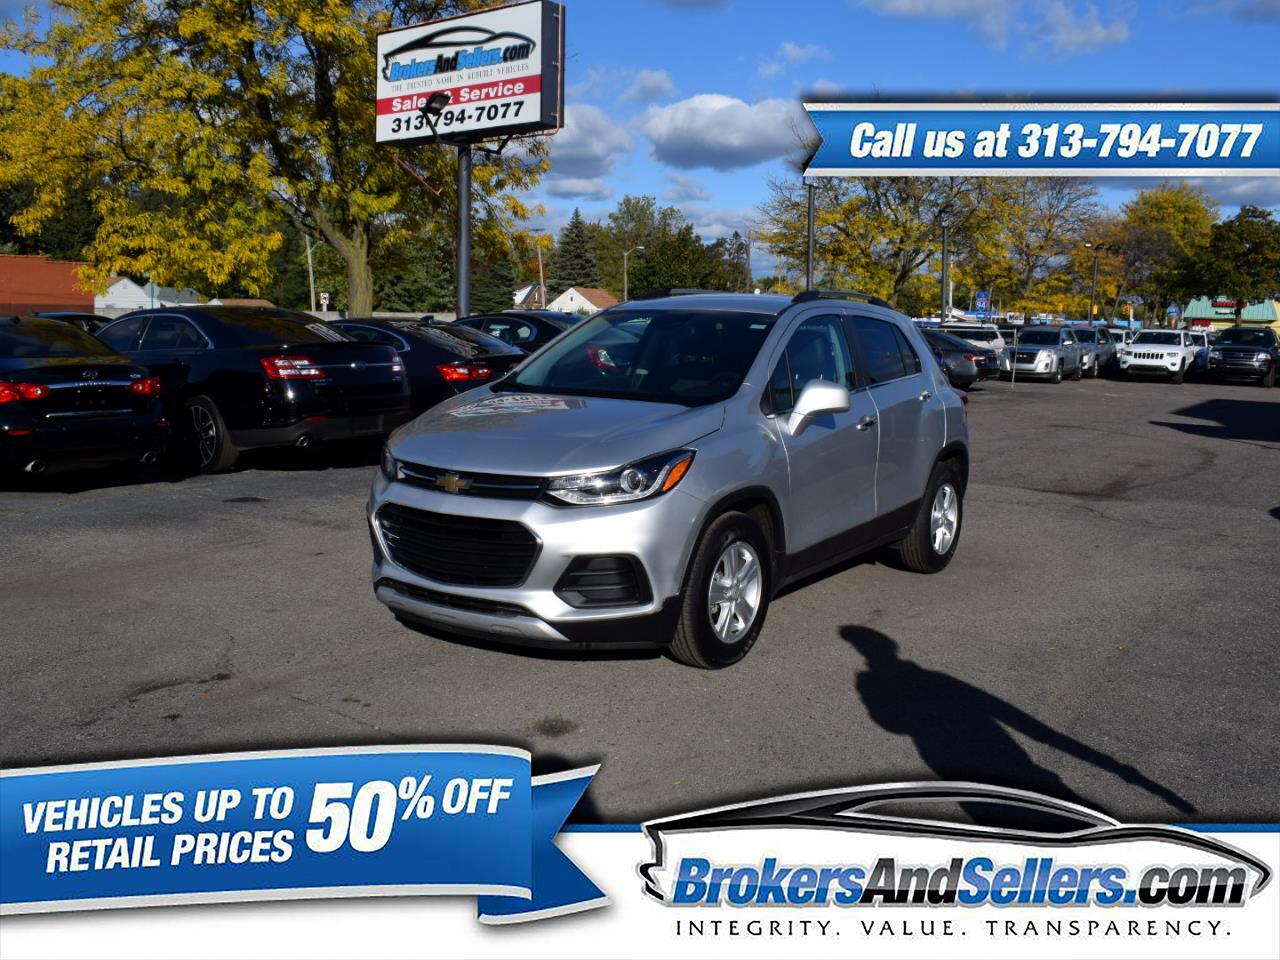 Used 2019 Chevrolet Trax Sold in Detroit MI 48180